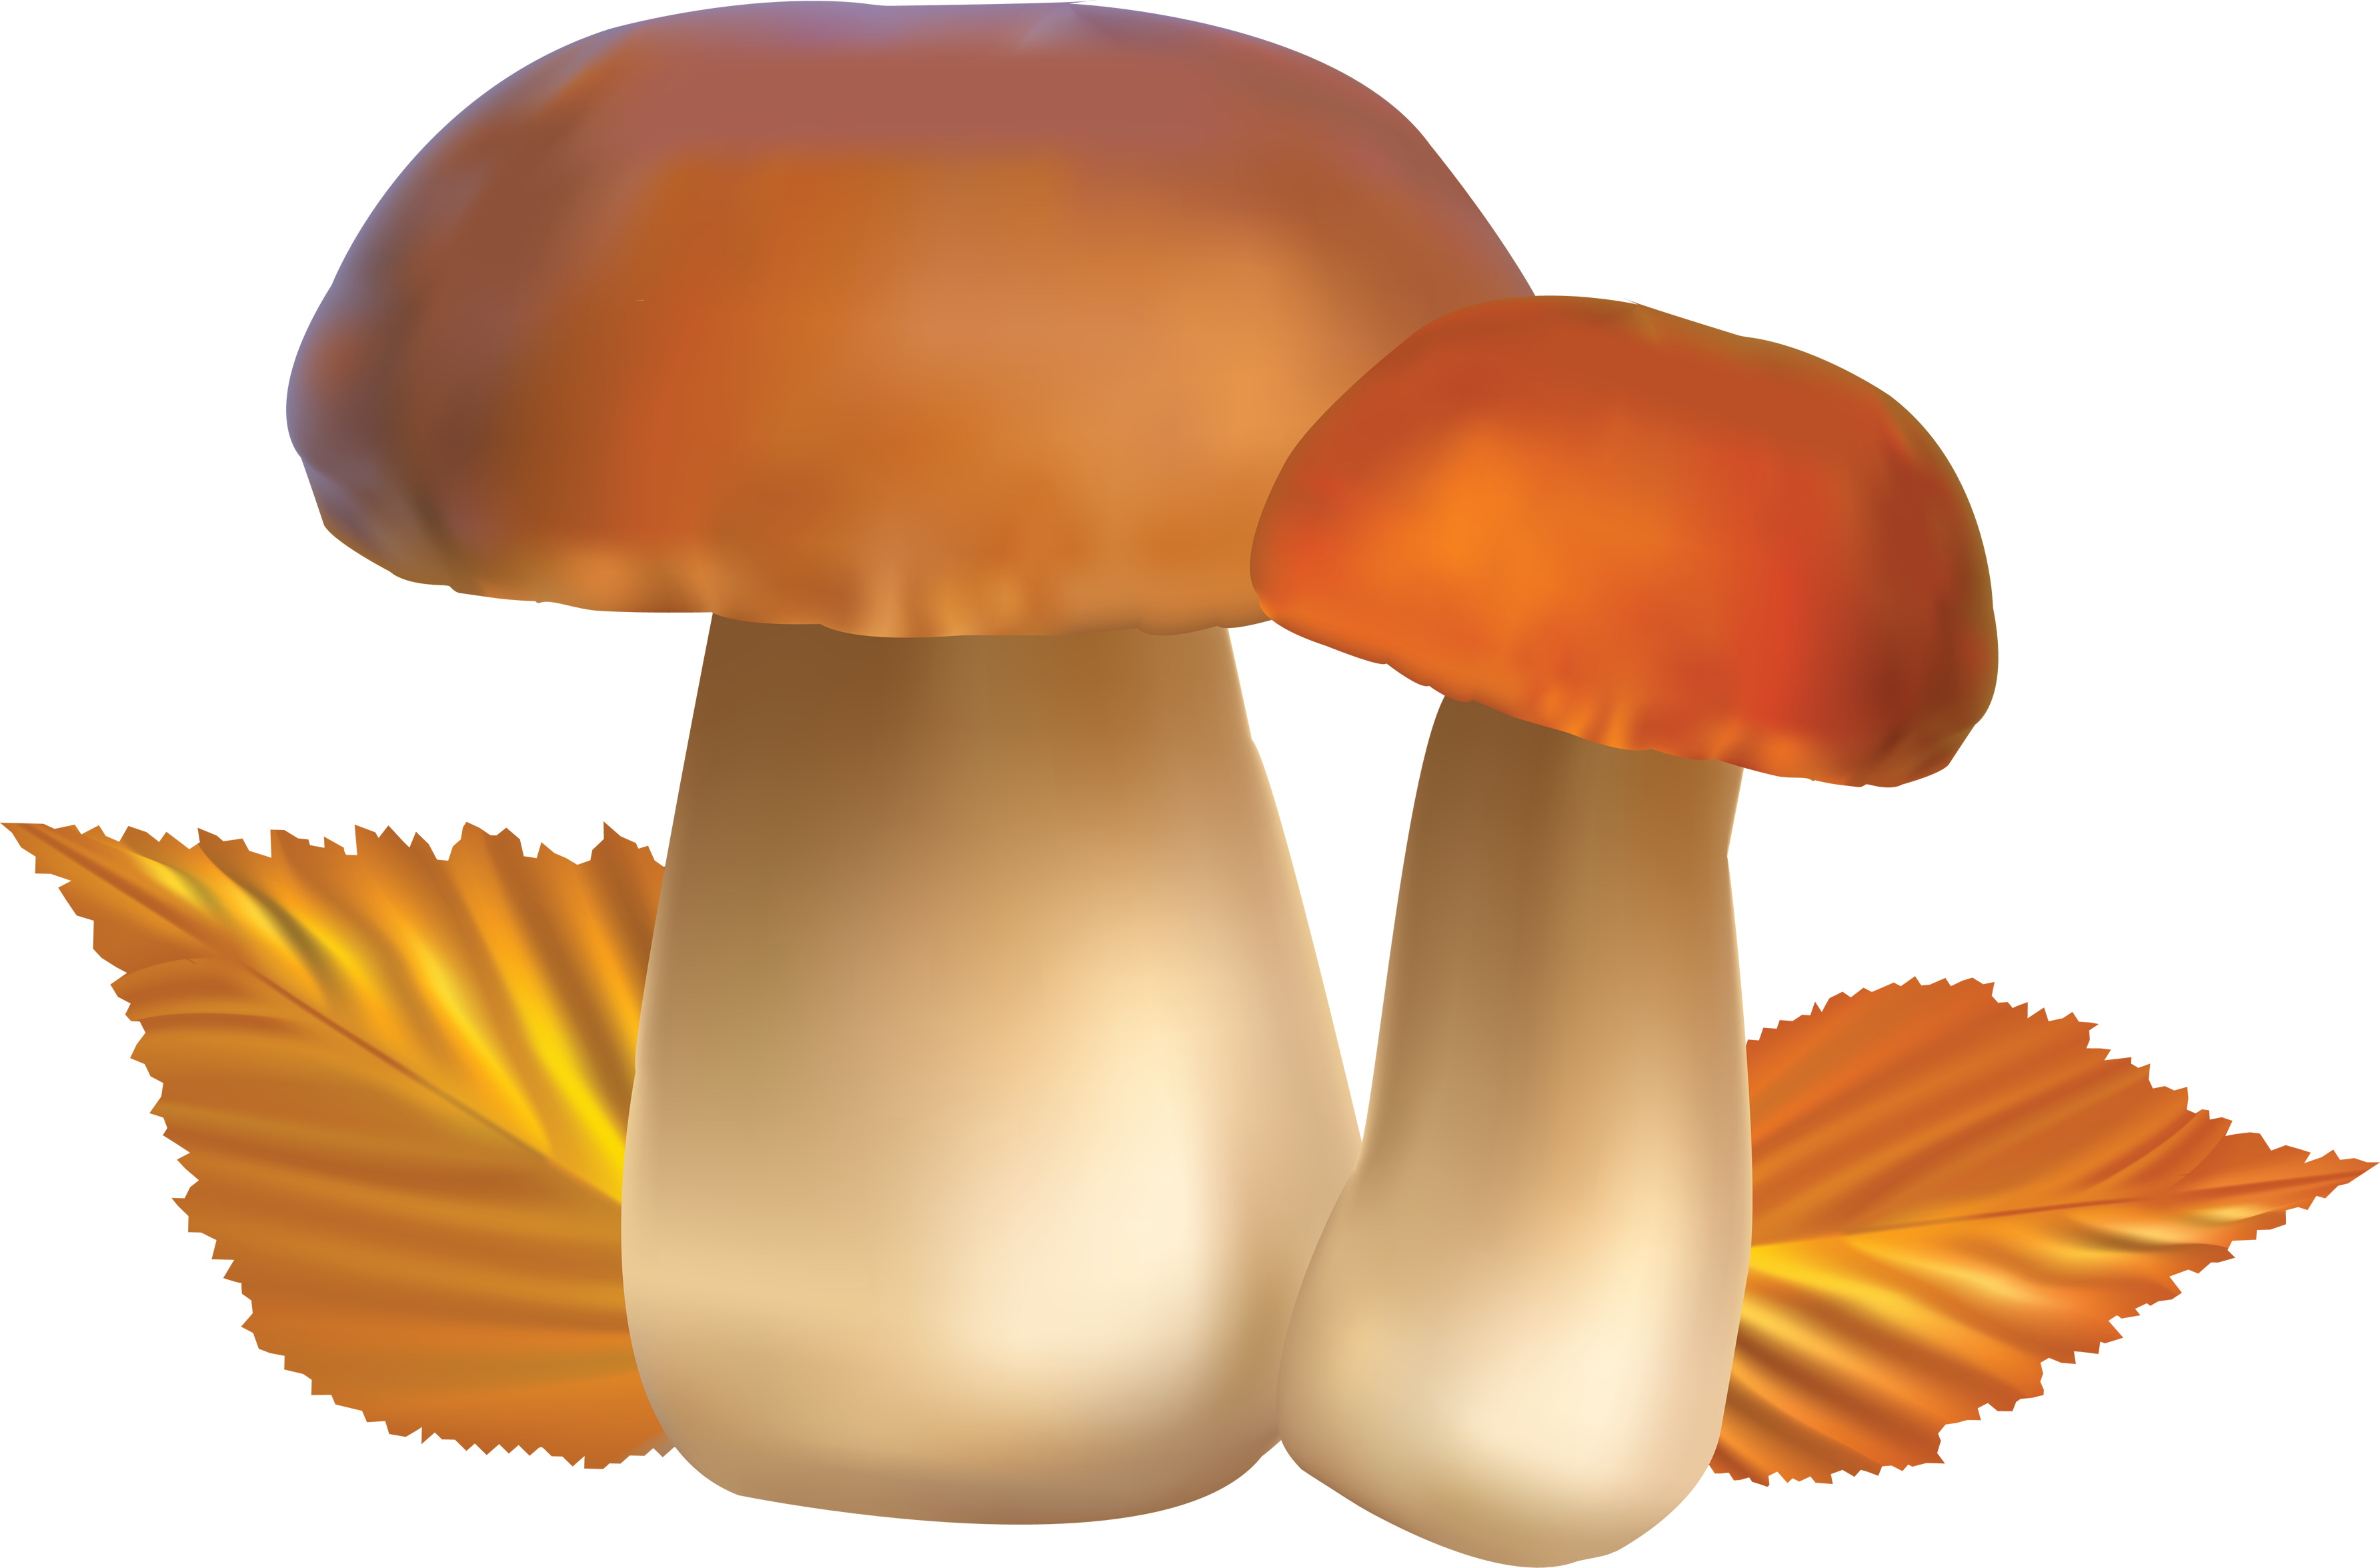 Mushroom images free pictures cliparts